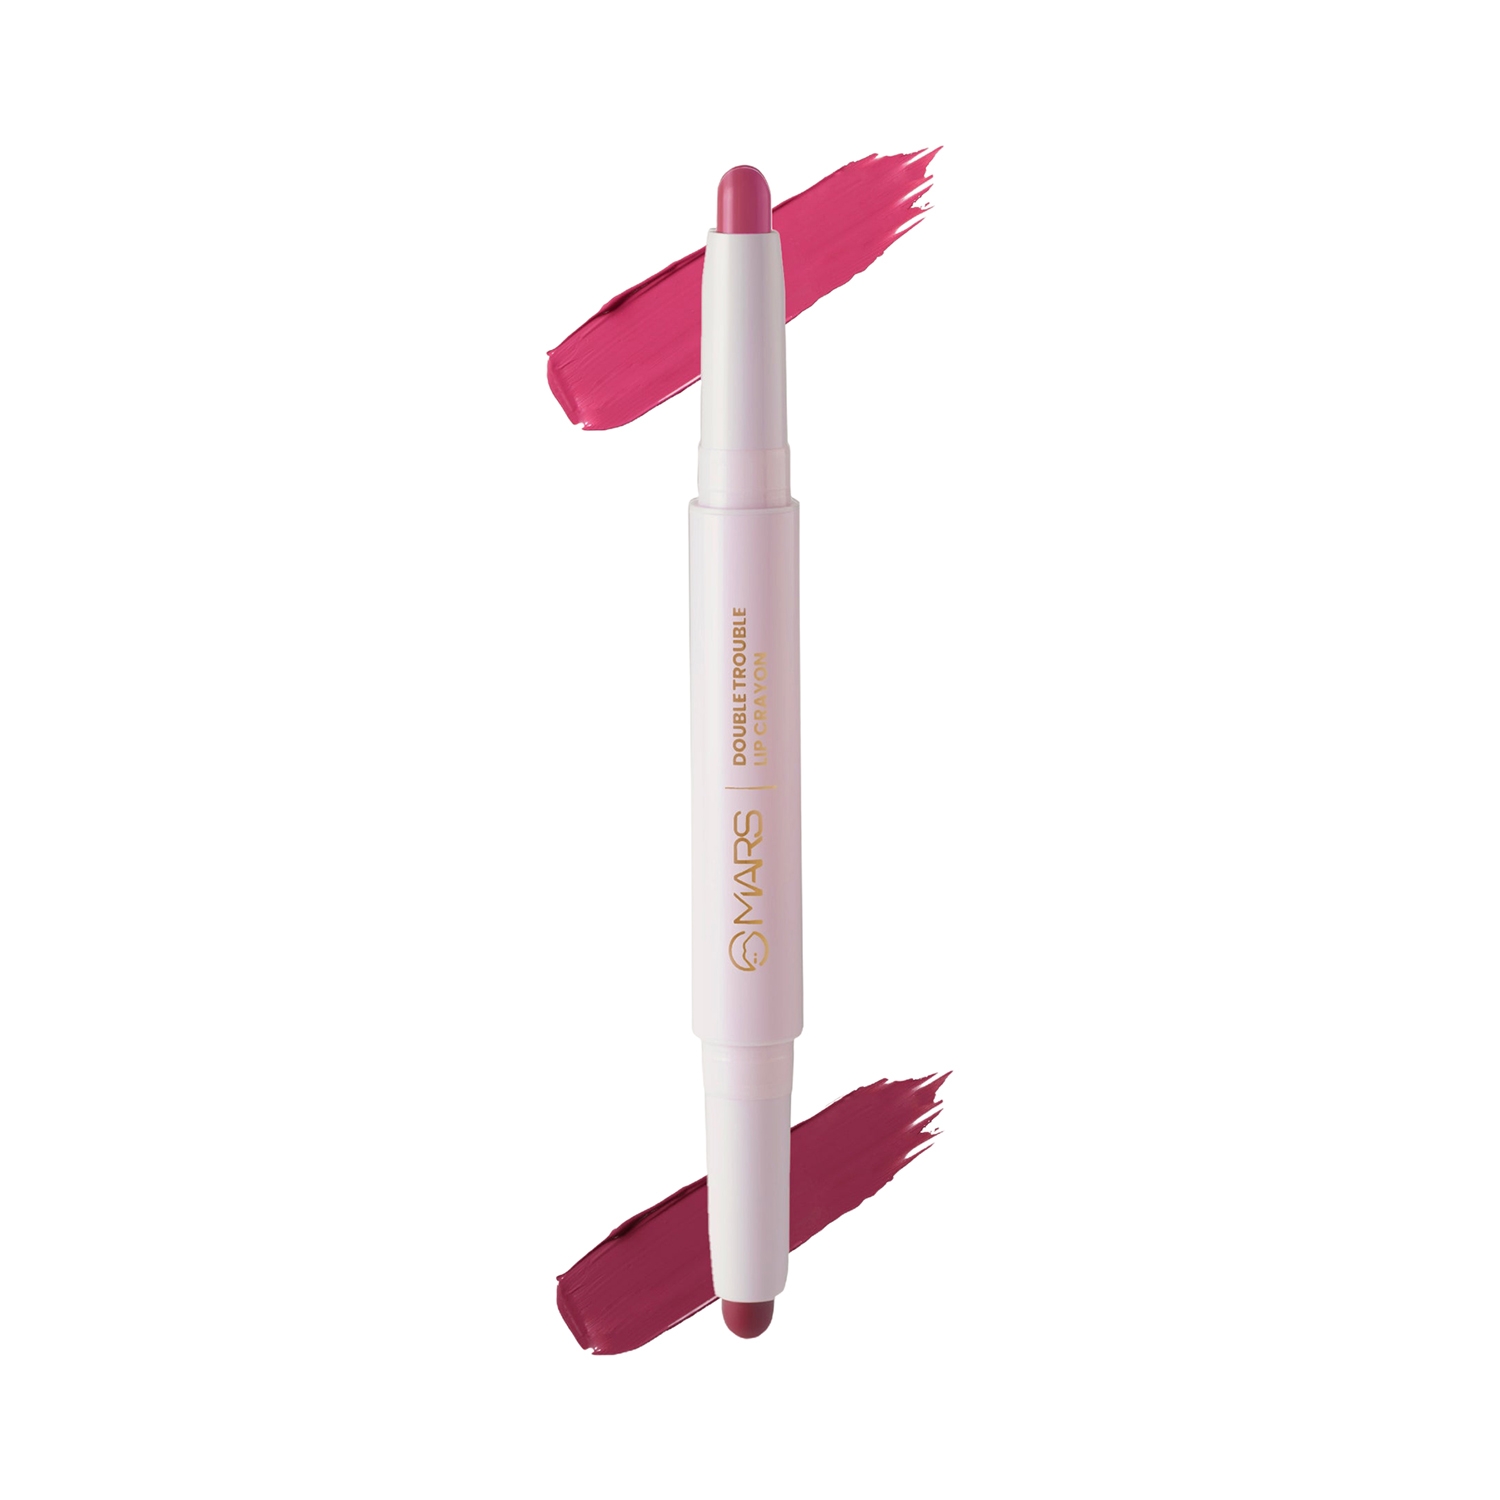 MARS Double Trouble Lip Crayon - 08 Tangy Jam (4g)